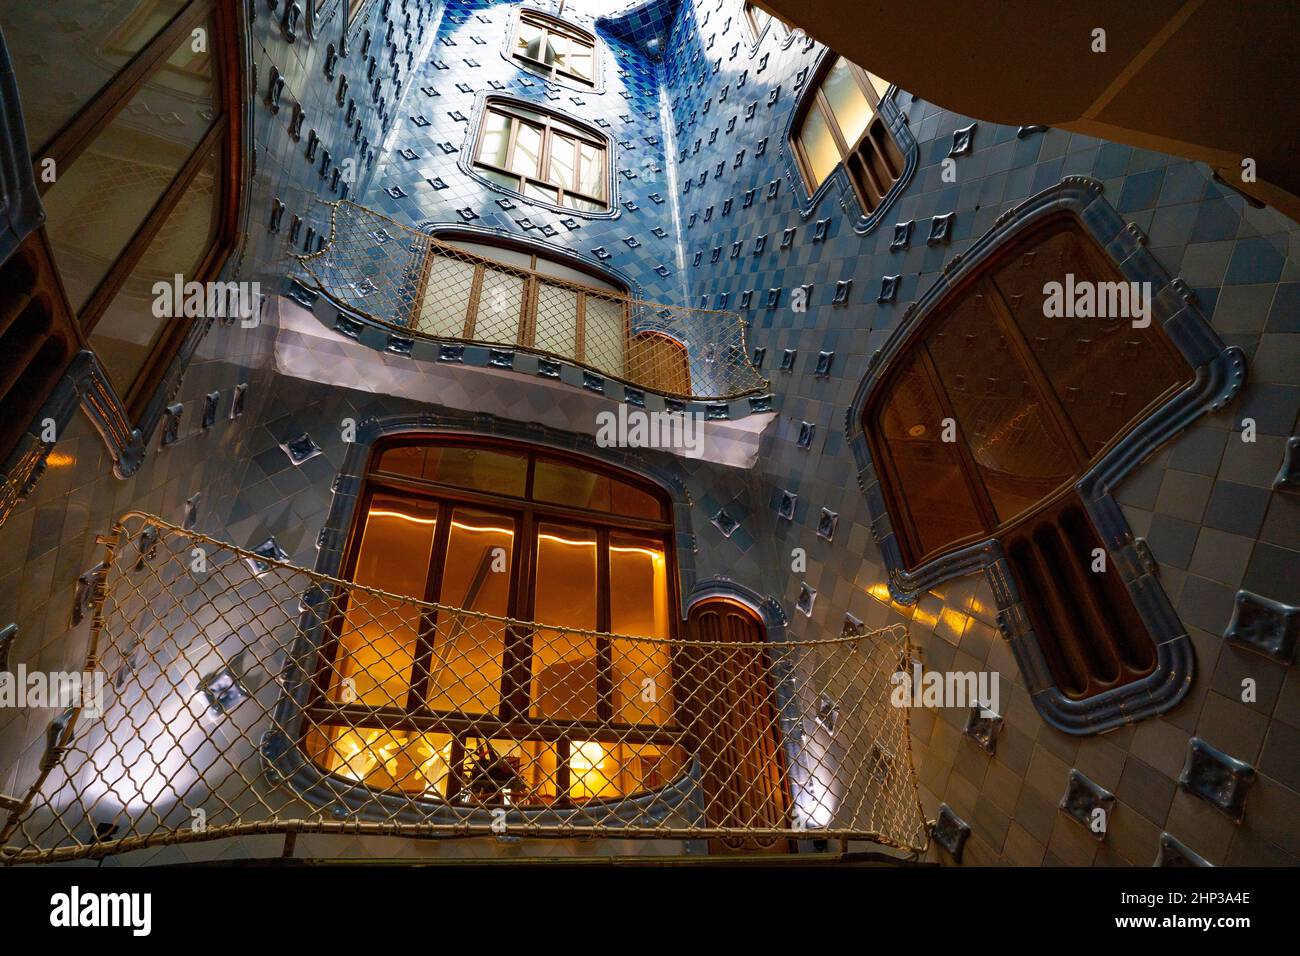 The Celobert or Patio of lights, the central passage for lighht and air in Casa Batllo, a house on Barcelona's Passeig de Gracia, redesigned by archit Stock Photo